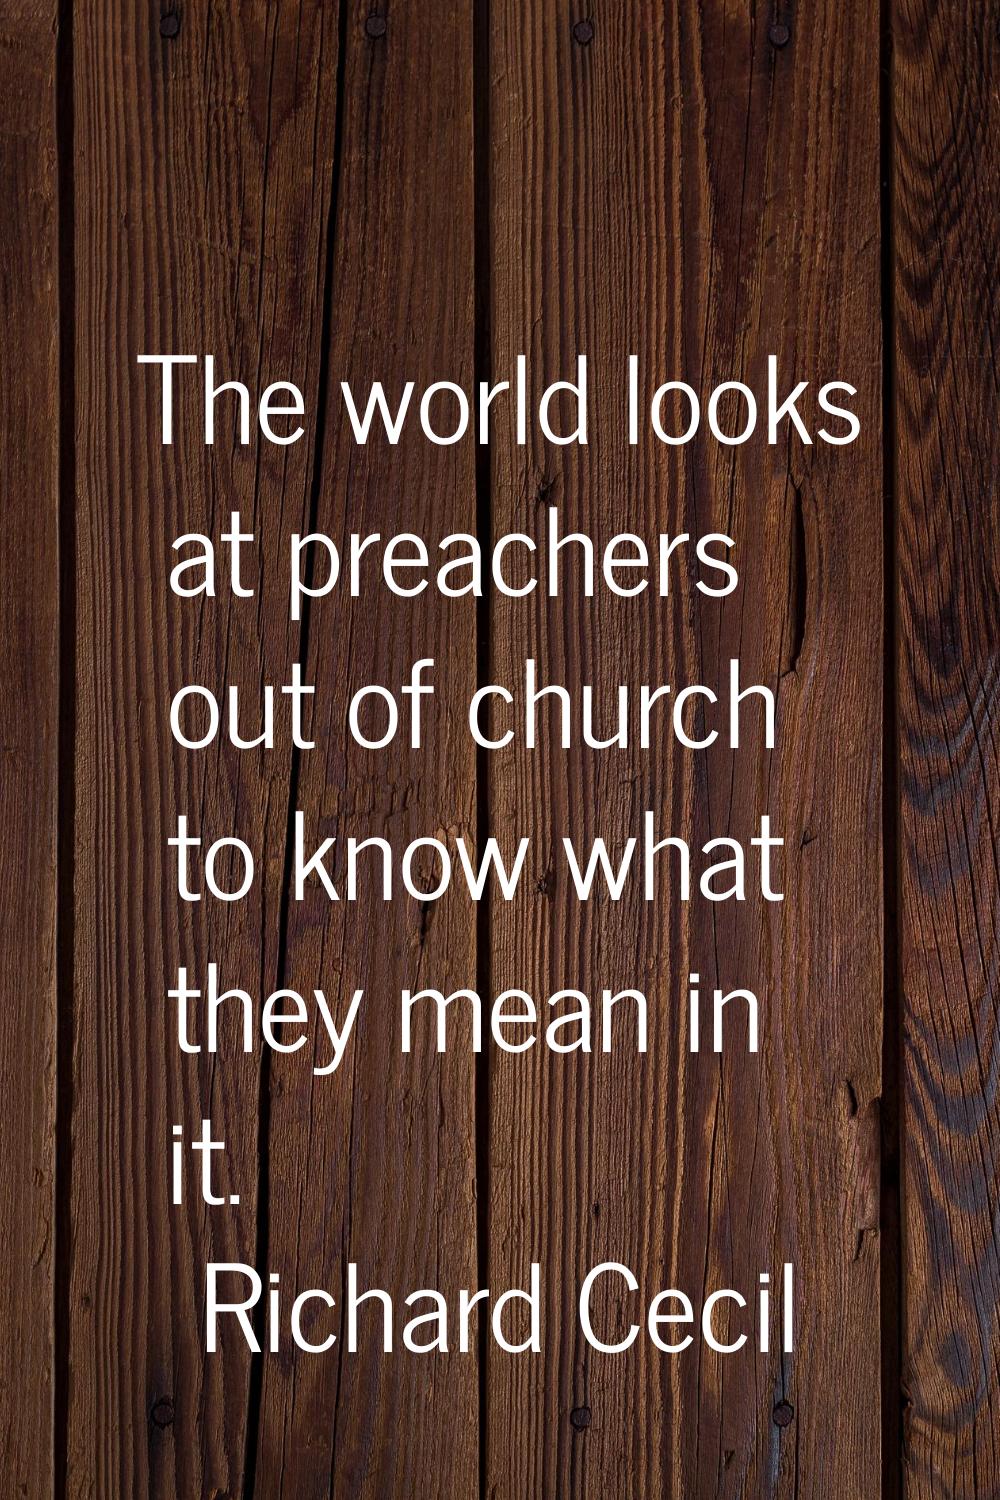 The world looks at preachers out of church to know what they mean in it.